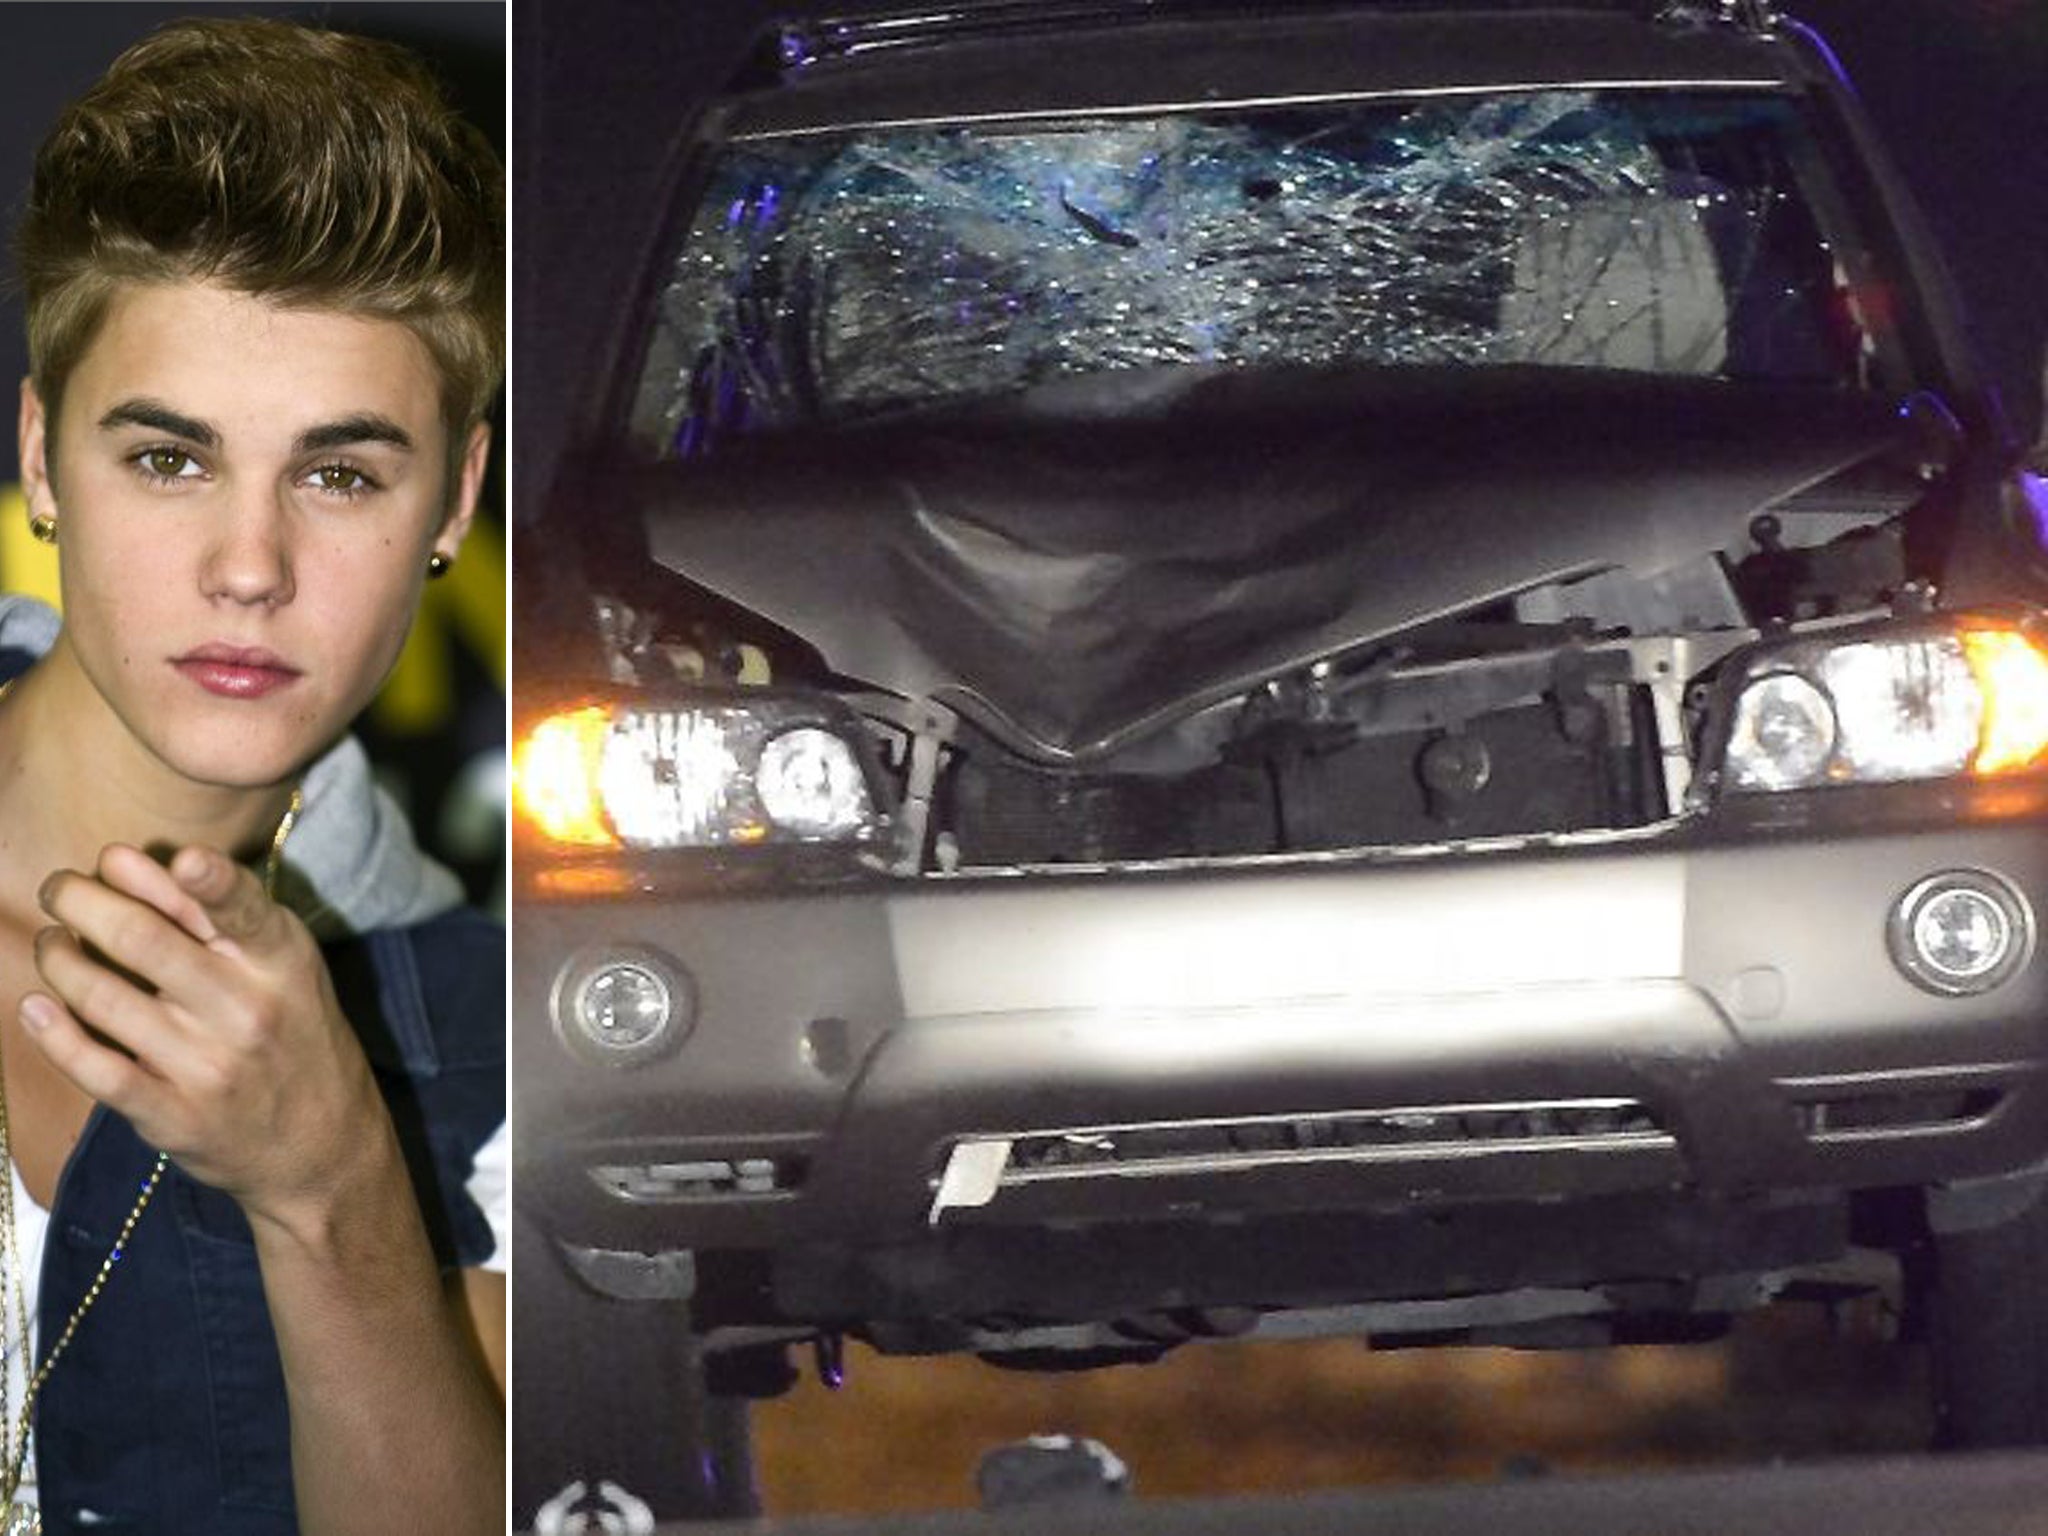 As a man died attempting to photograph Justin Bieber's car, it's sad to